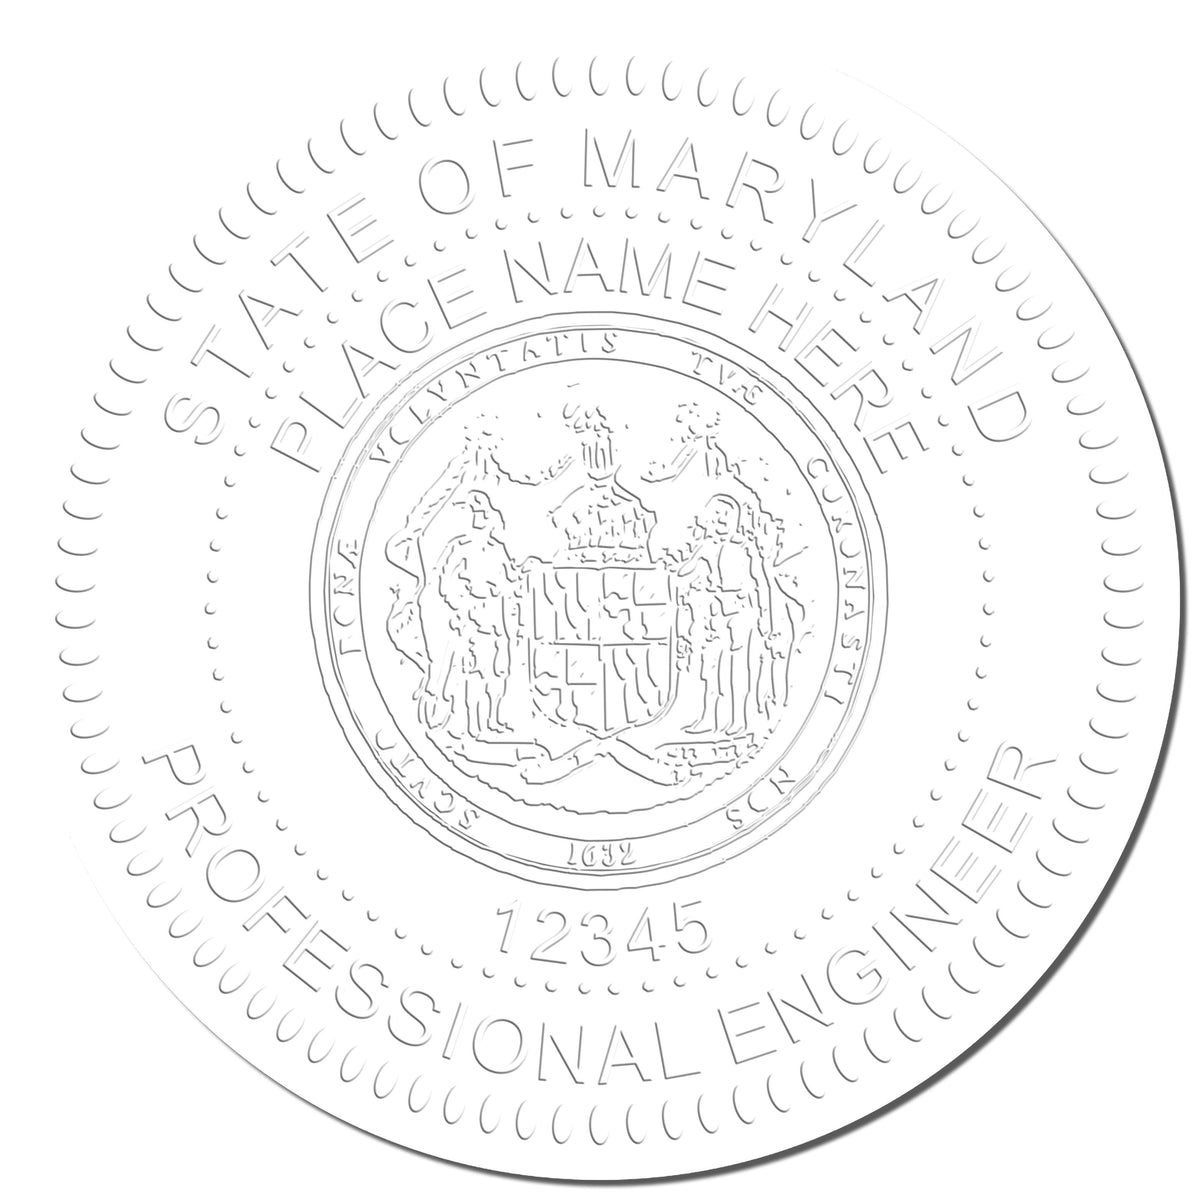 This paper is stamped with a sample imprint of the Heavy Duty Cast Iron Maryland Engineer Seal Embosser, signifying its quality and reliability.